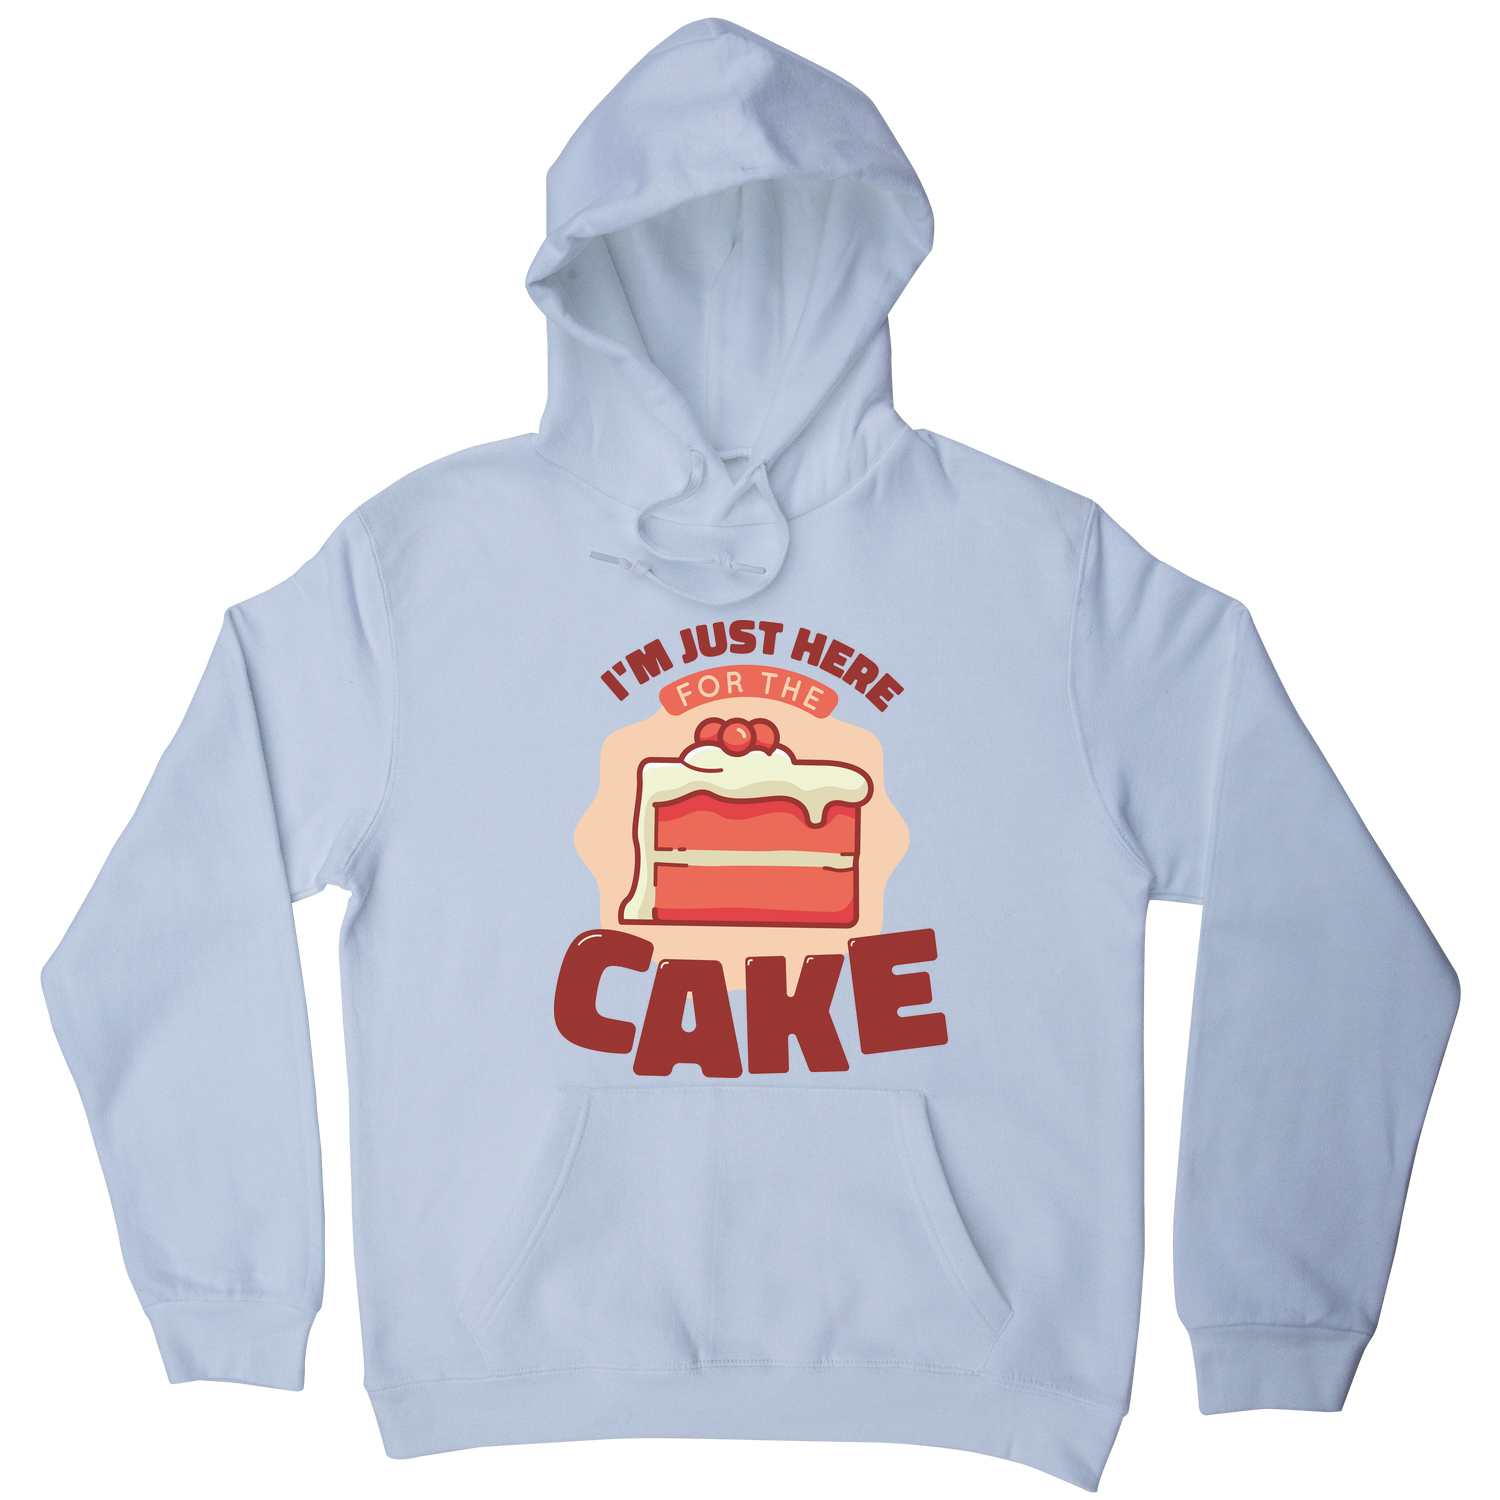 Hoodie/pull Over Cake For Young Teenager's Birthday. - CakeCentral.com